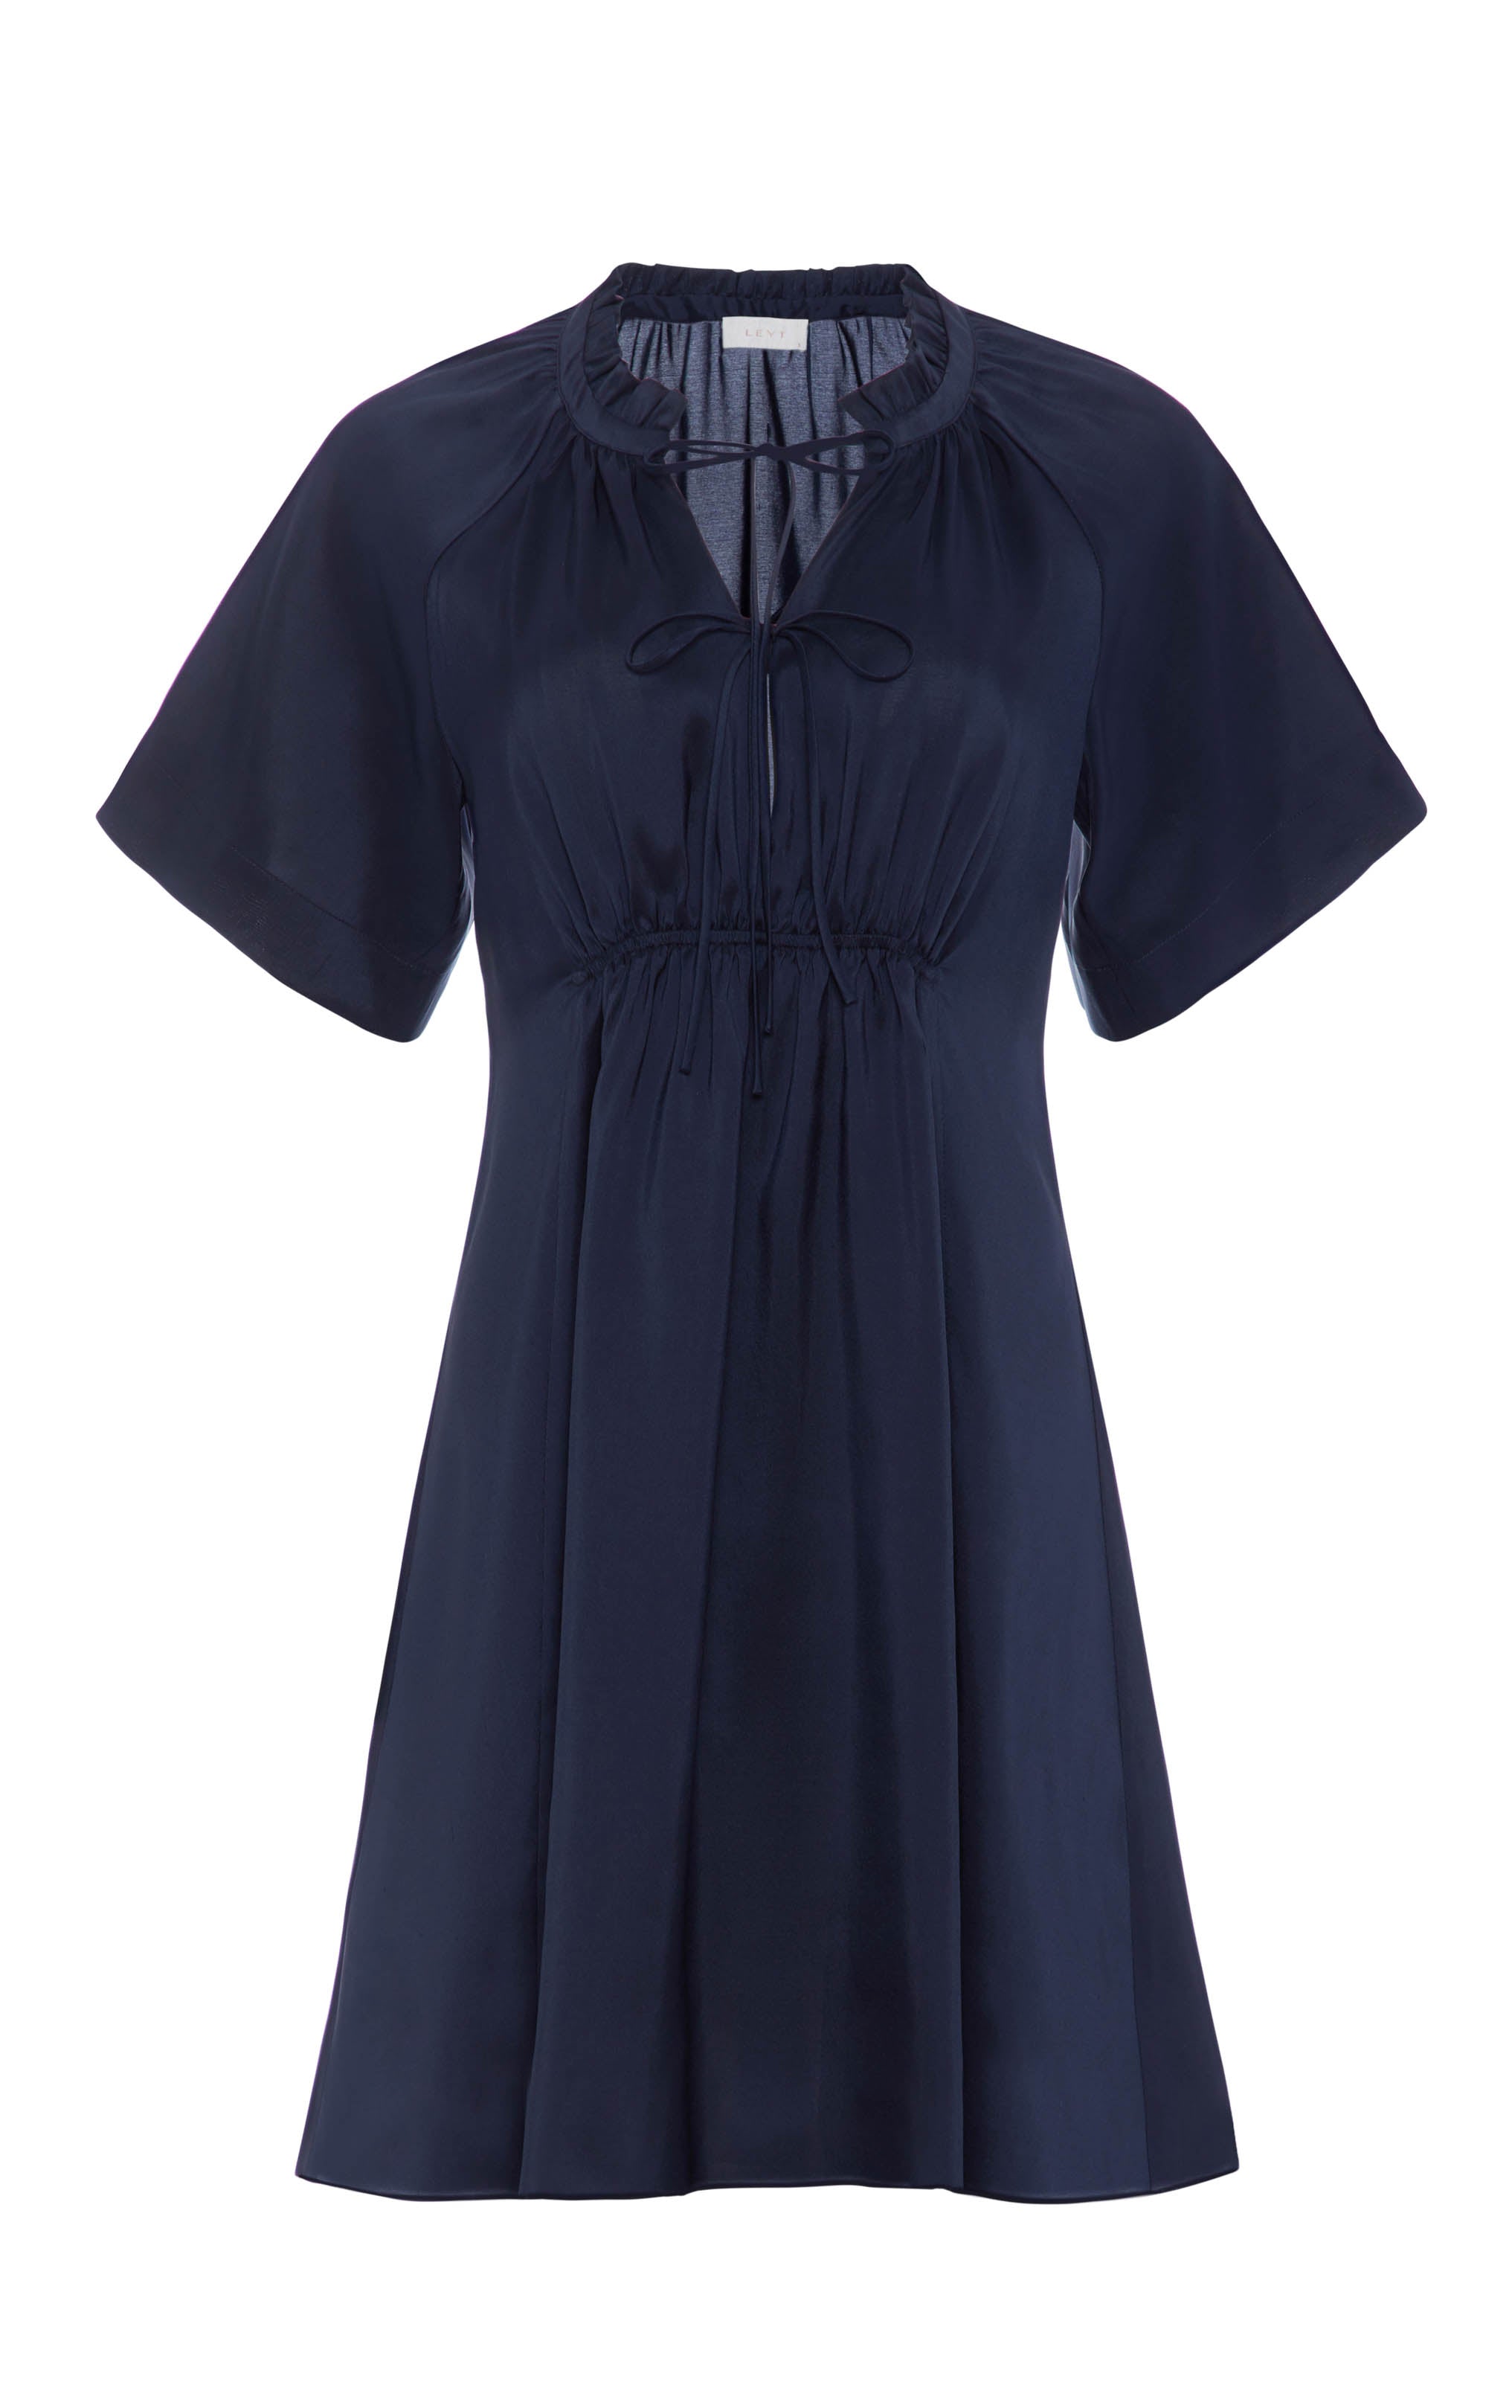 navy short sleeved silk dress with ruffled neck and silhouette cut